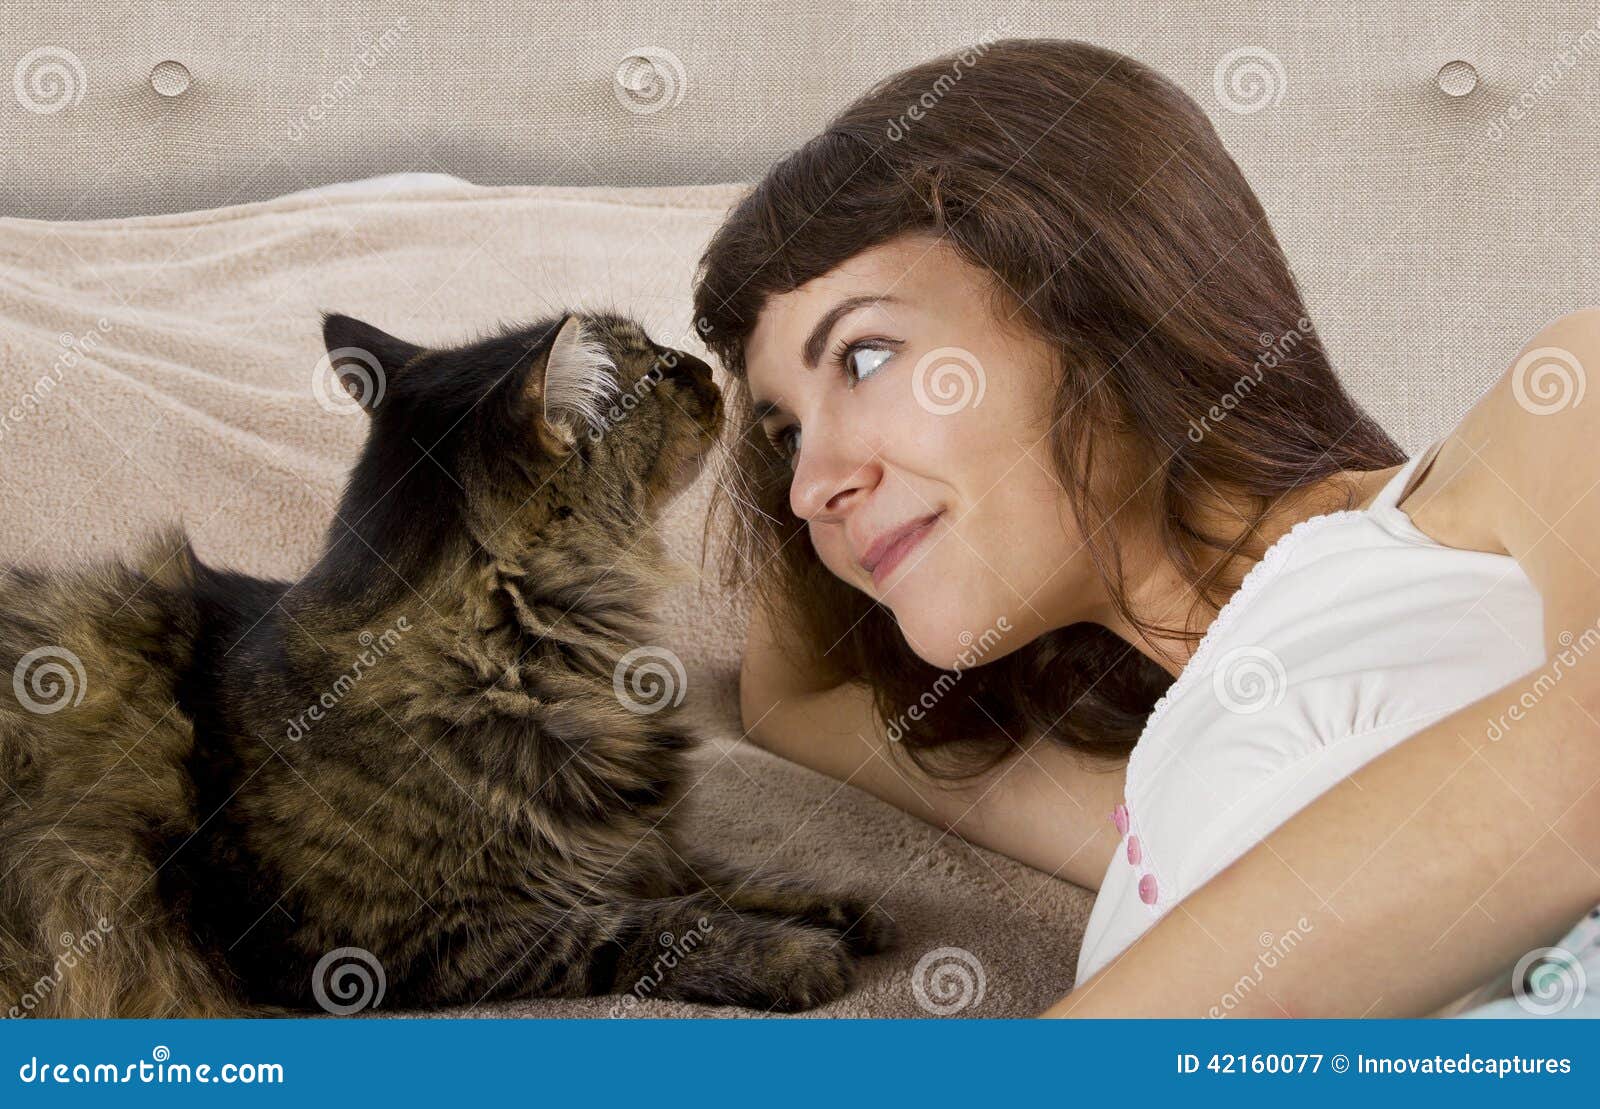 Cat on a Bed stock image. Image of fluffy, friendship - 42160077